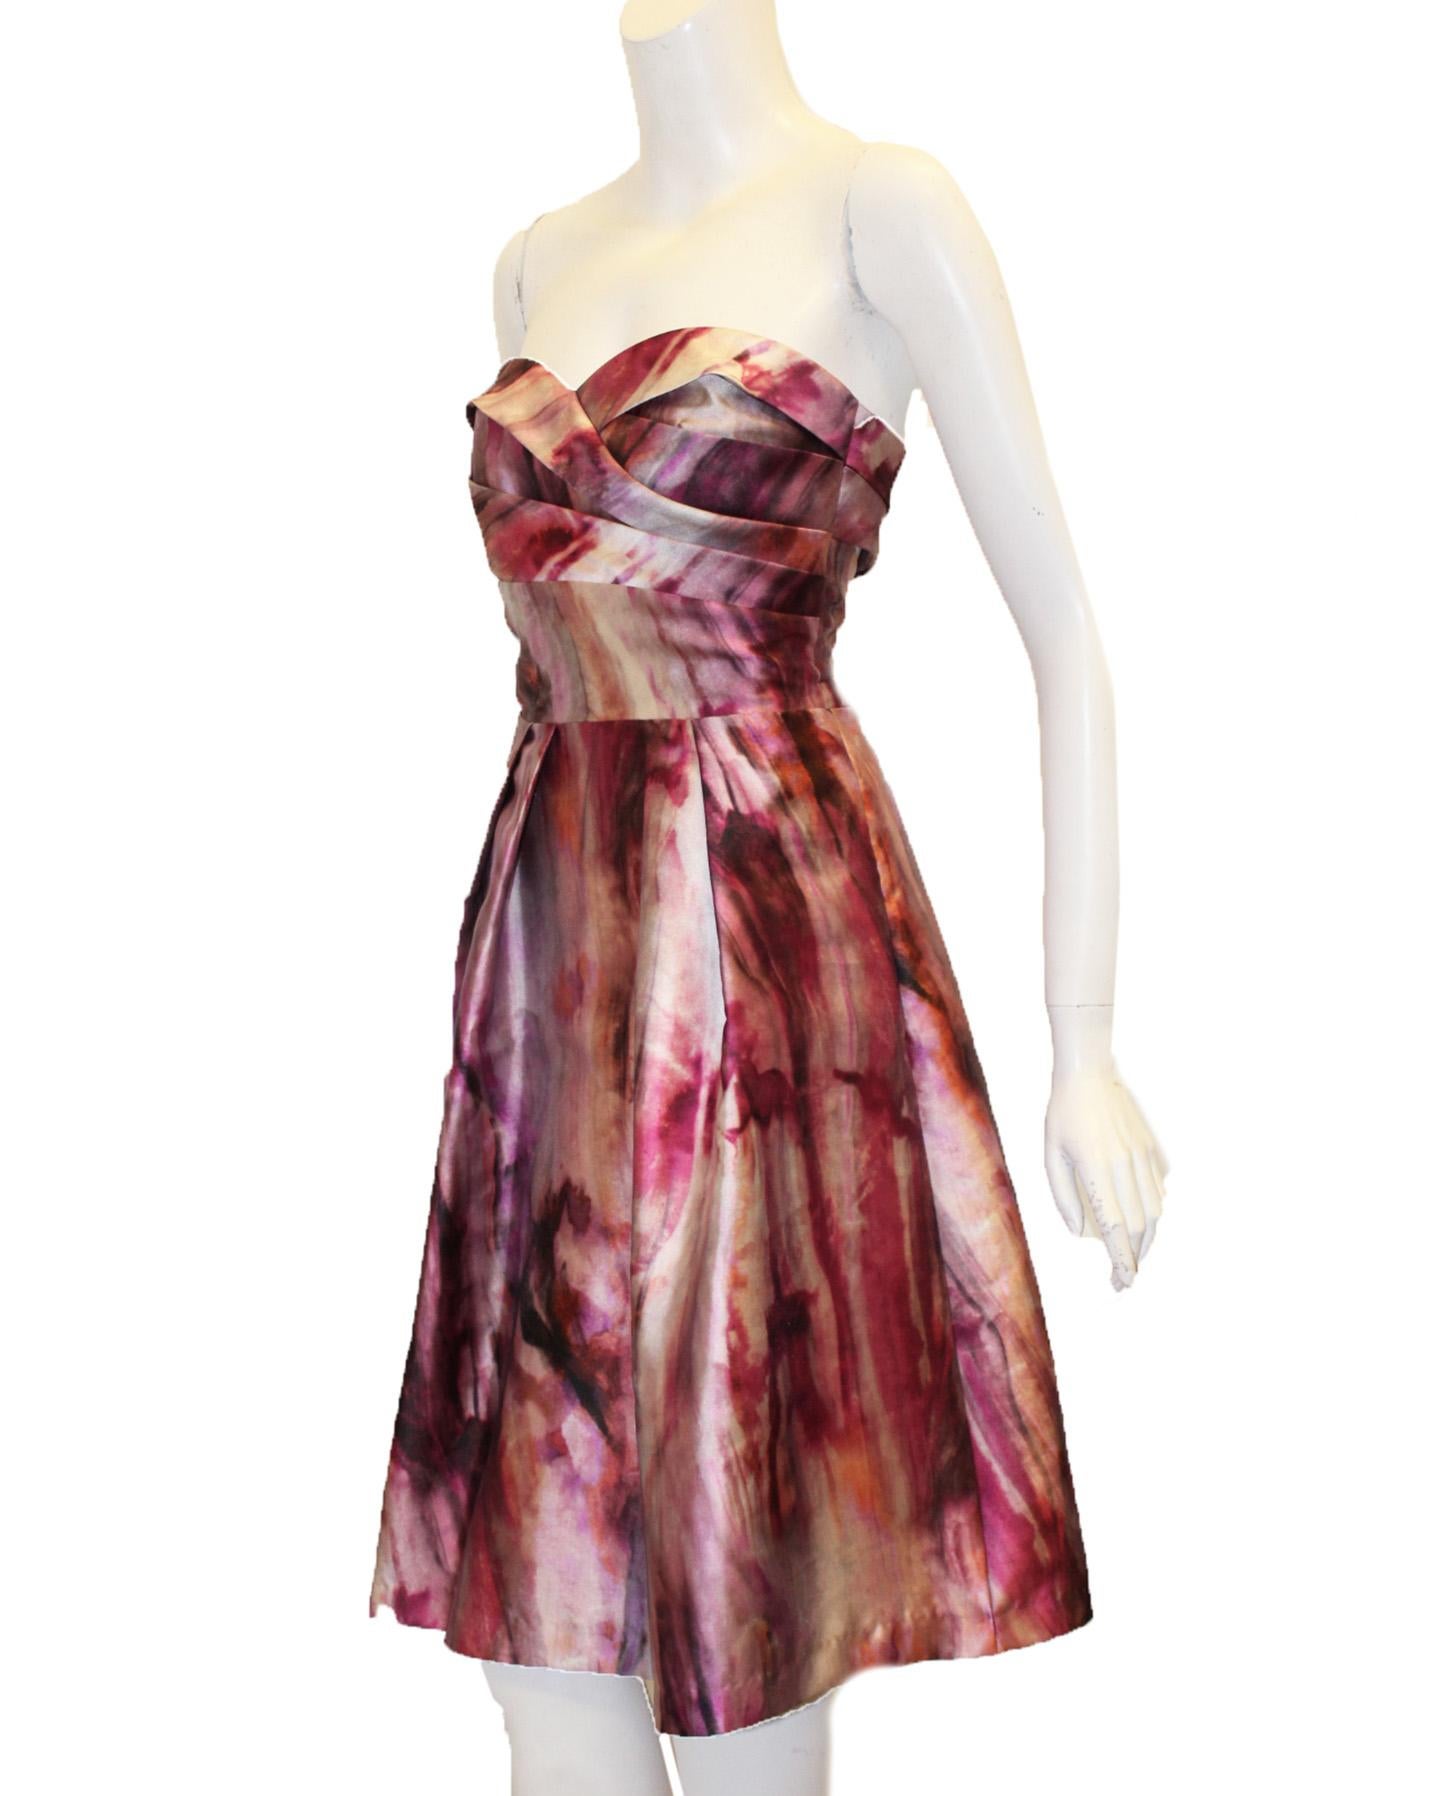 Pamella Roland Abstract Floral Design in Pink & Lavender Strapless Dress In Excellent Condition For Sale In Palm Beach, FL